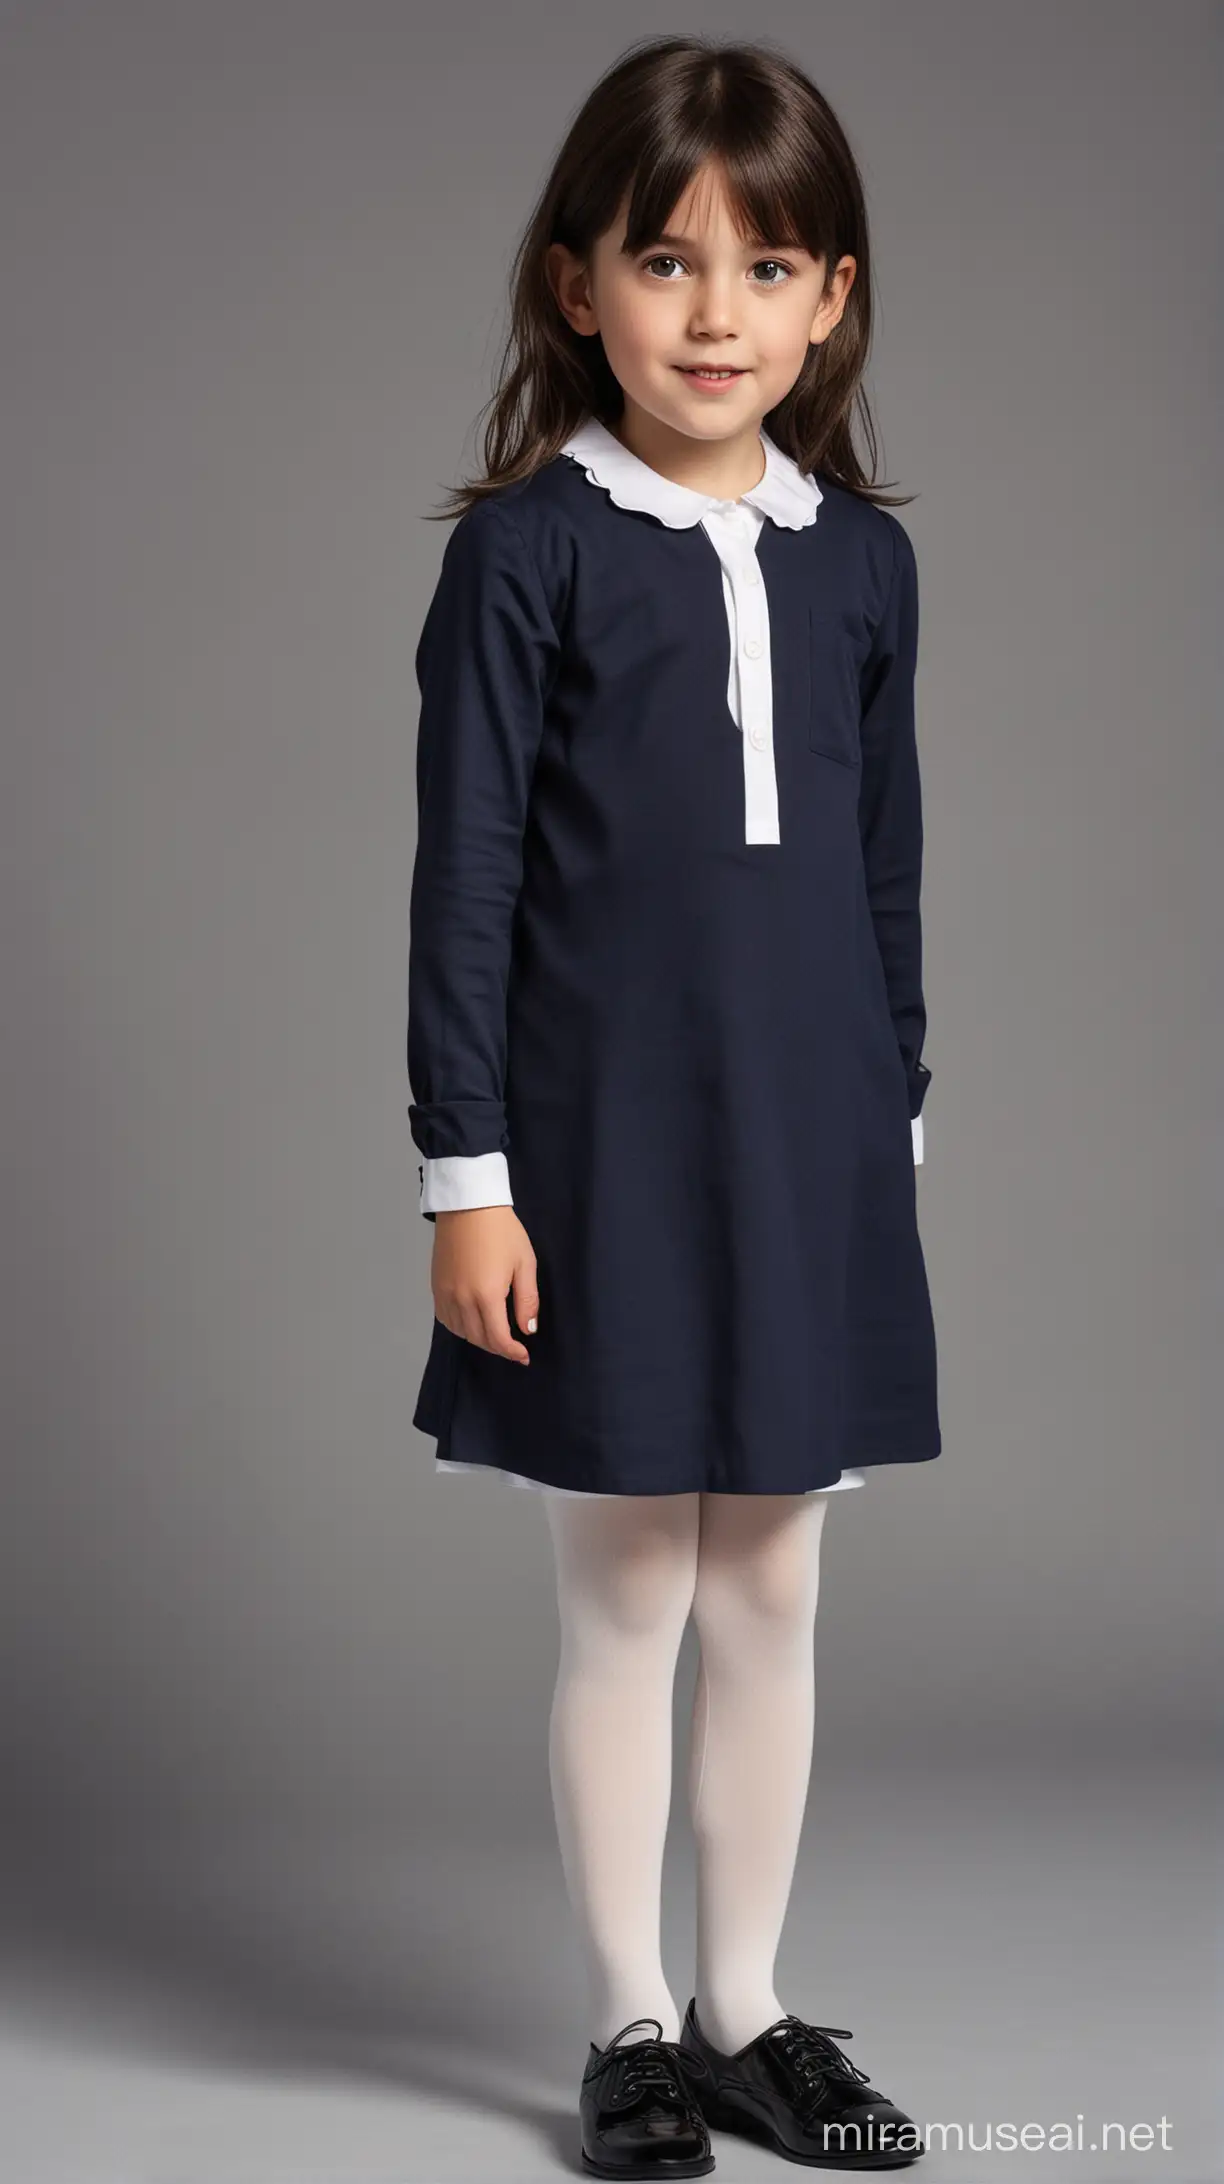 Realistic Portrait of Young Girl in Navy Blue Tunic and White Shirt